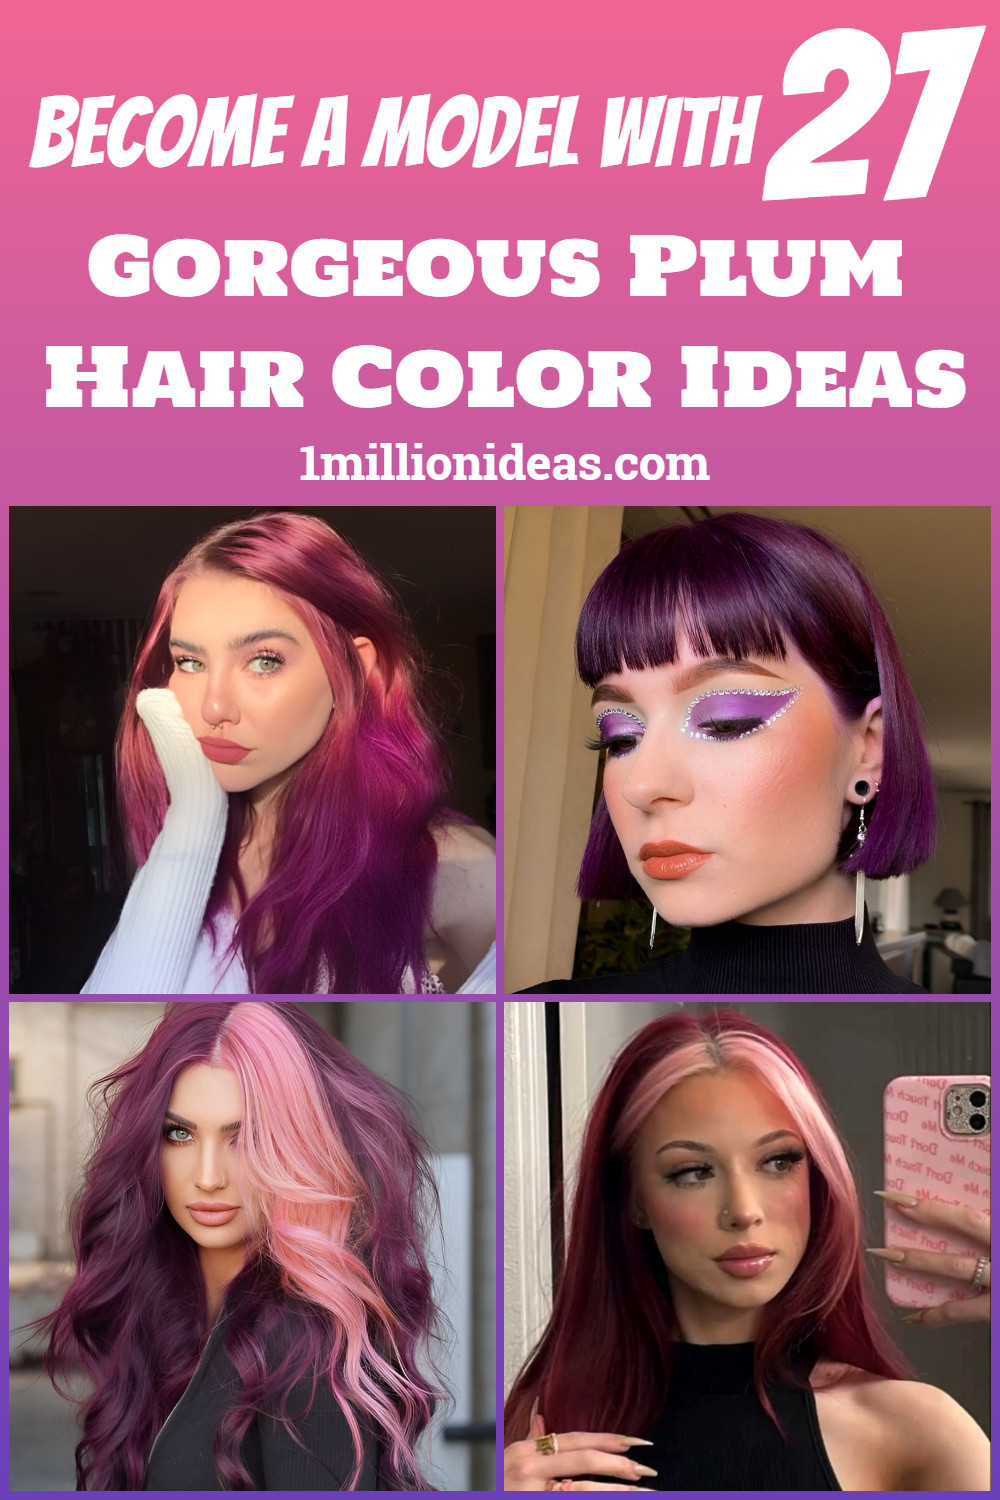 Become A Model With These 27 Gorgeous Plum Hair Color Ideas - 173